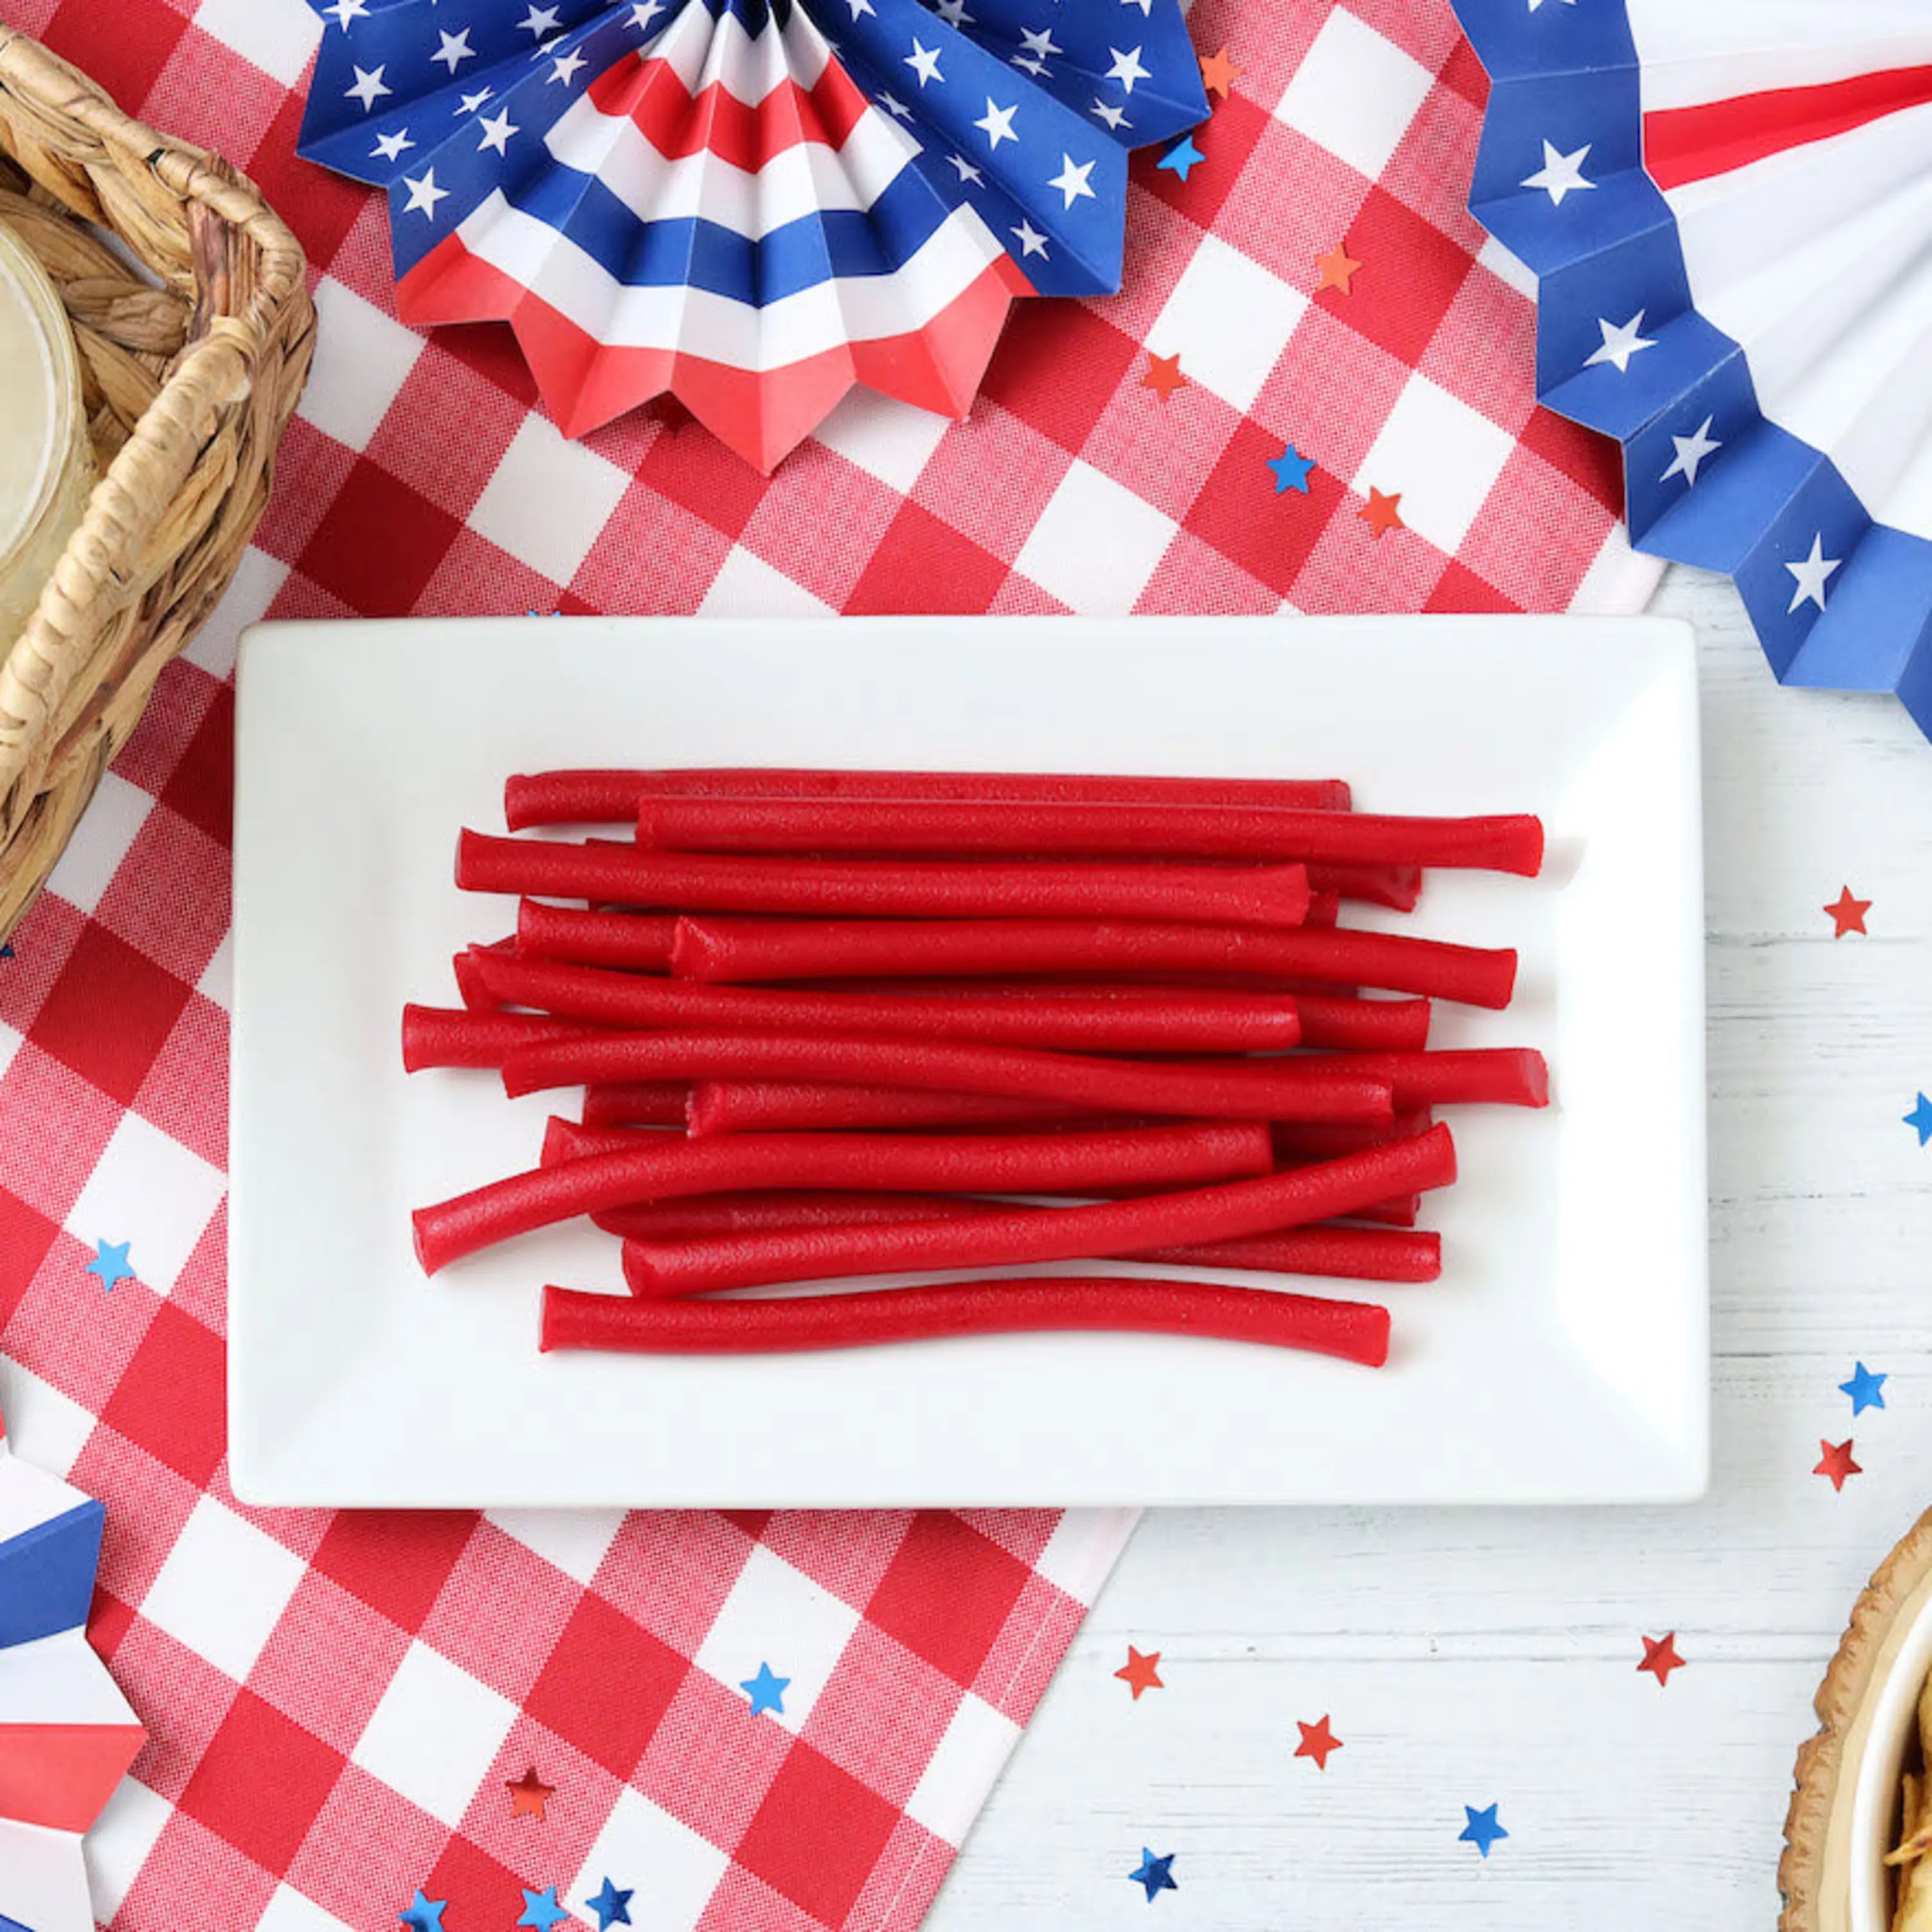 Red Vines Red Ropes Licorice Candy on a picnic table with patriotic decorations